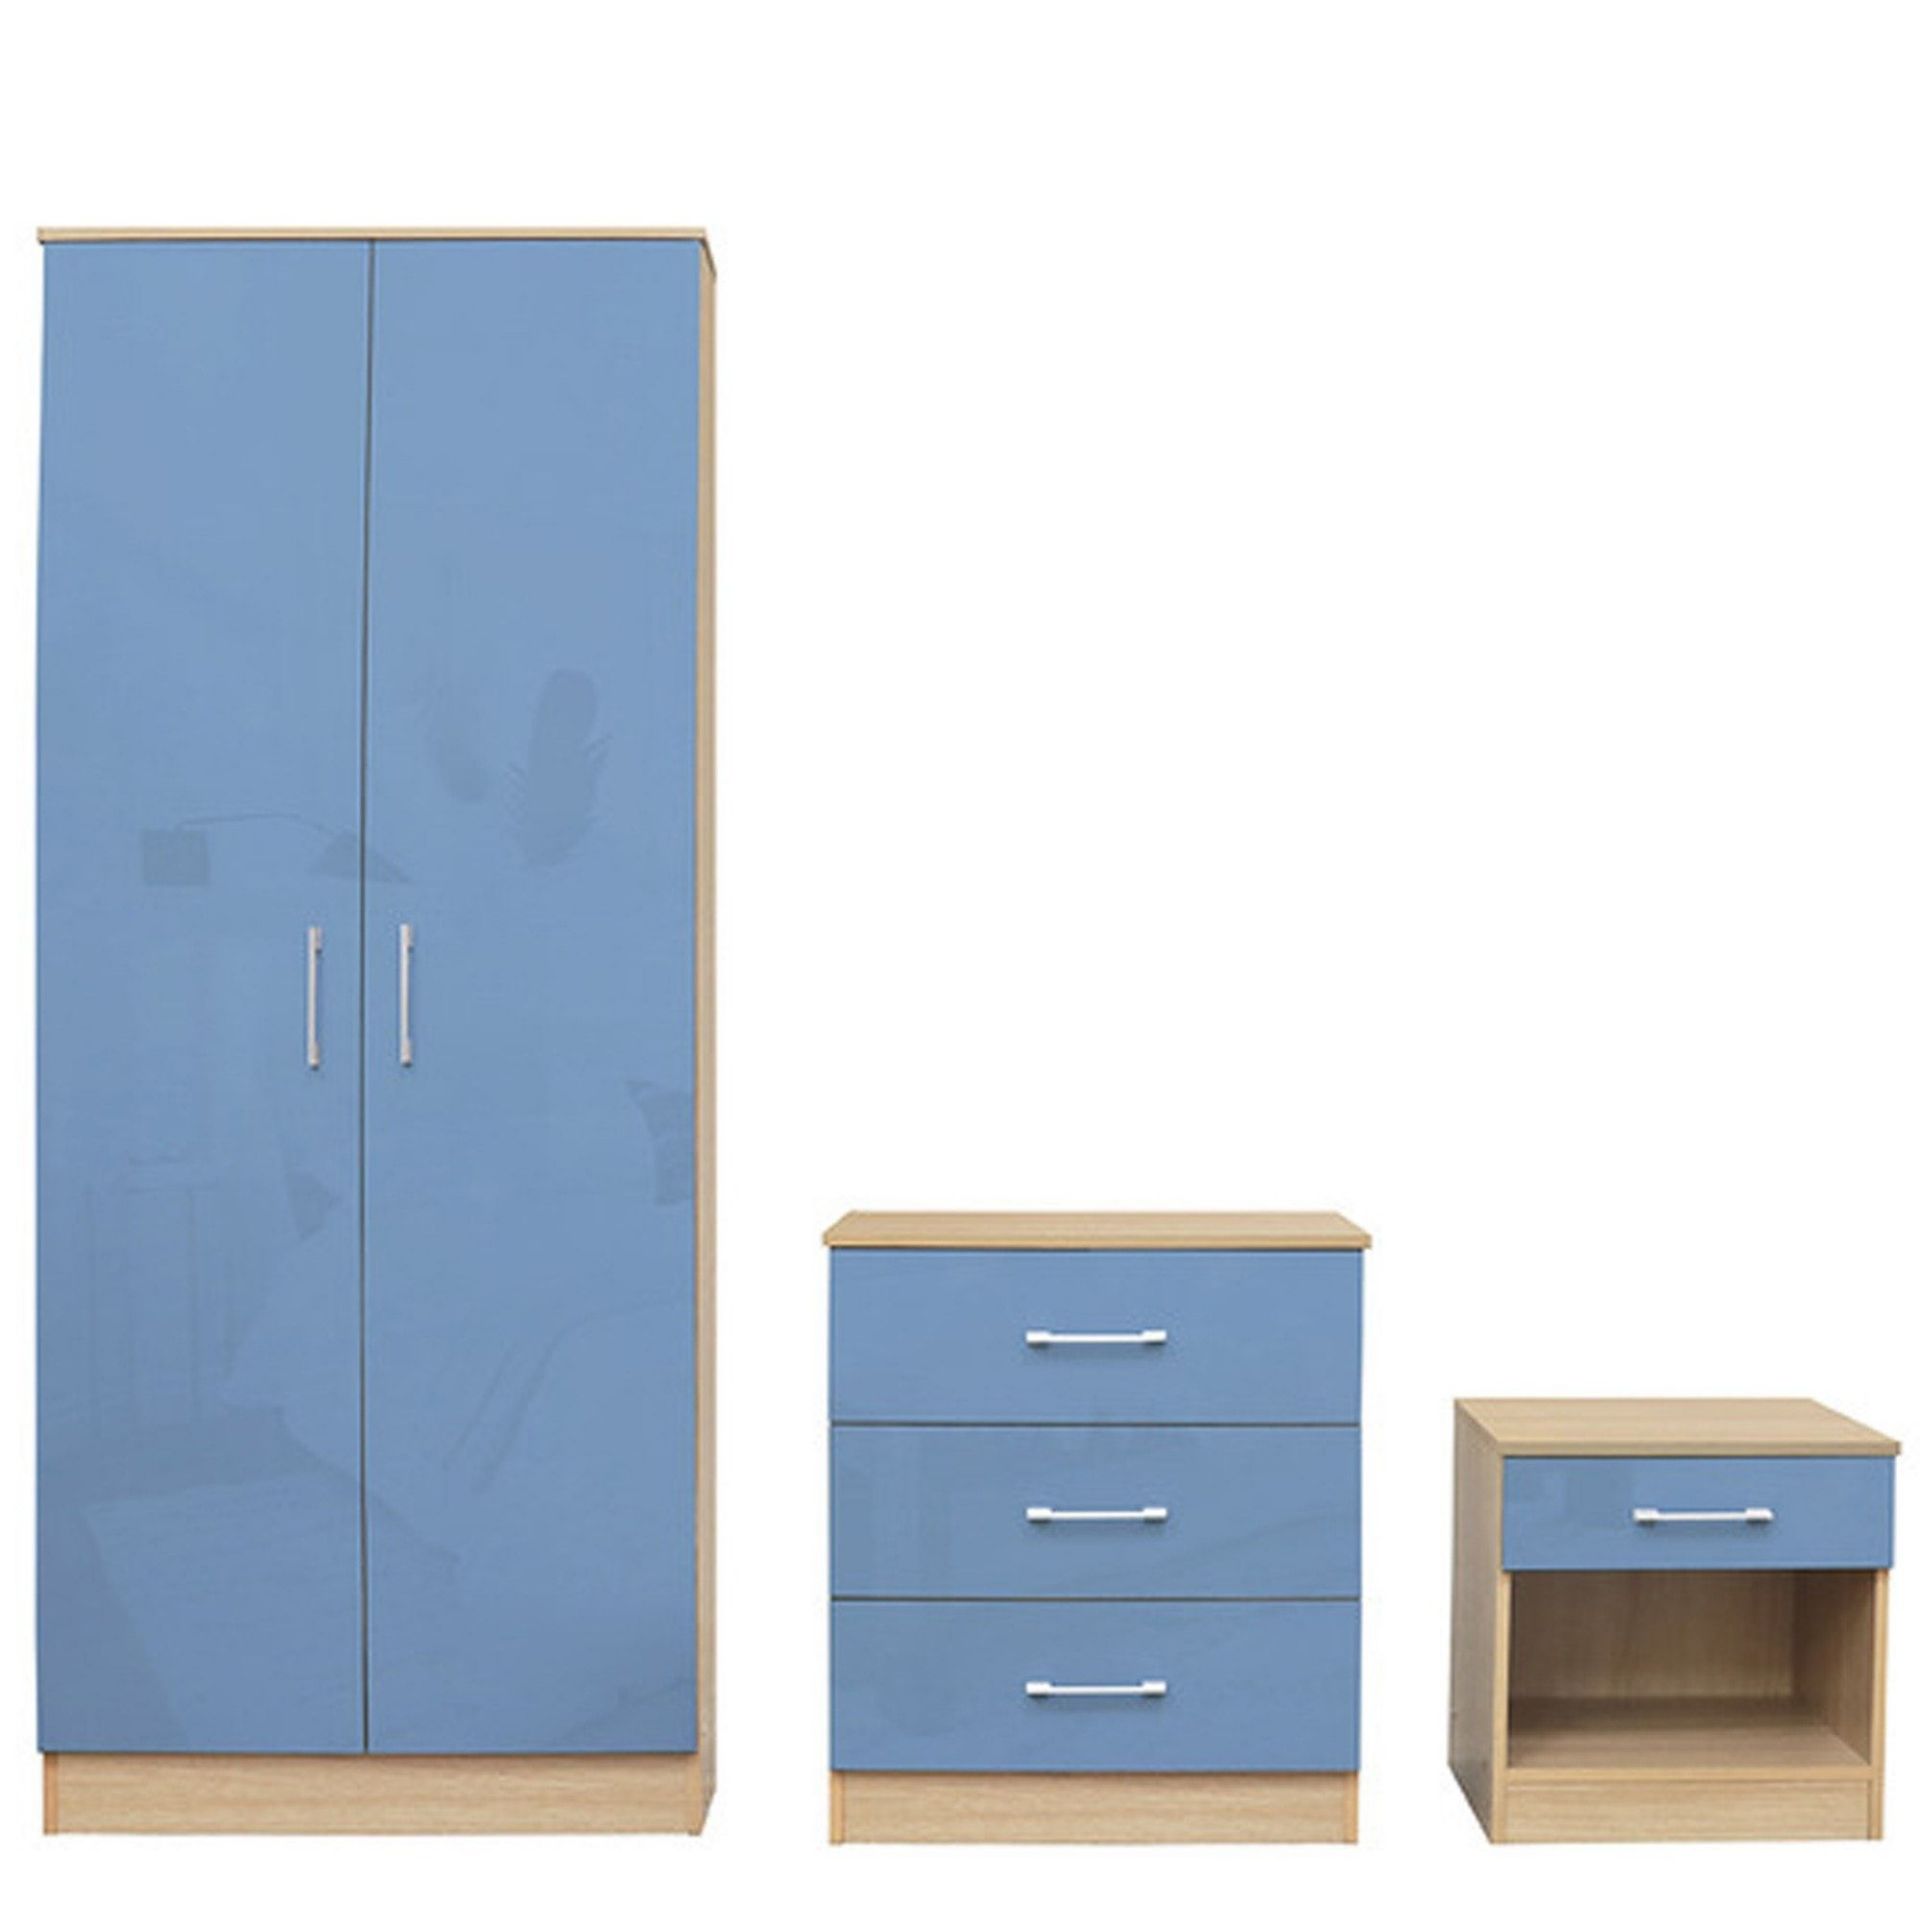 NEW BOXED 3 Piece Dakota Blue Bedroom Set. RRP £404.99. Made From MDF High Class Contemporary Style. - Image 2 of 2